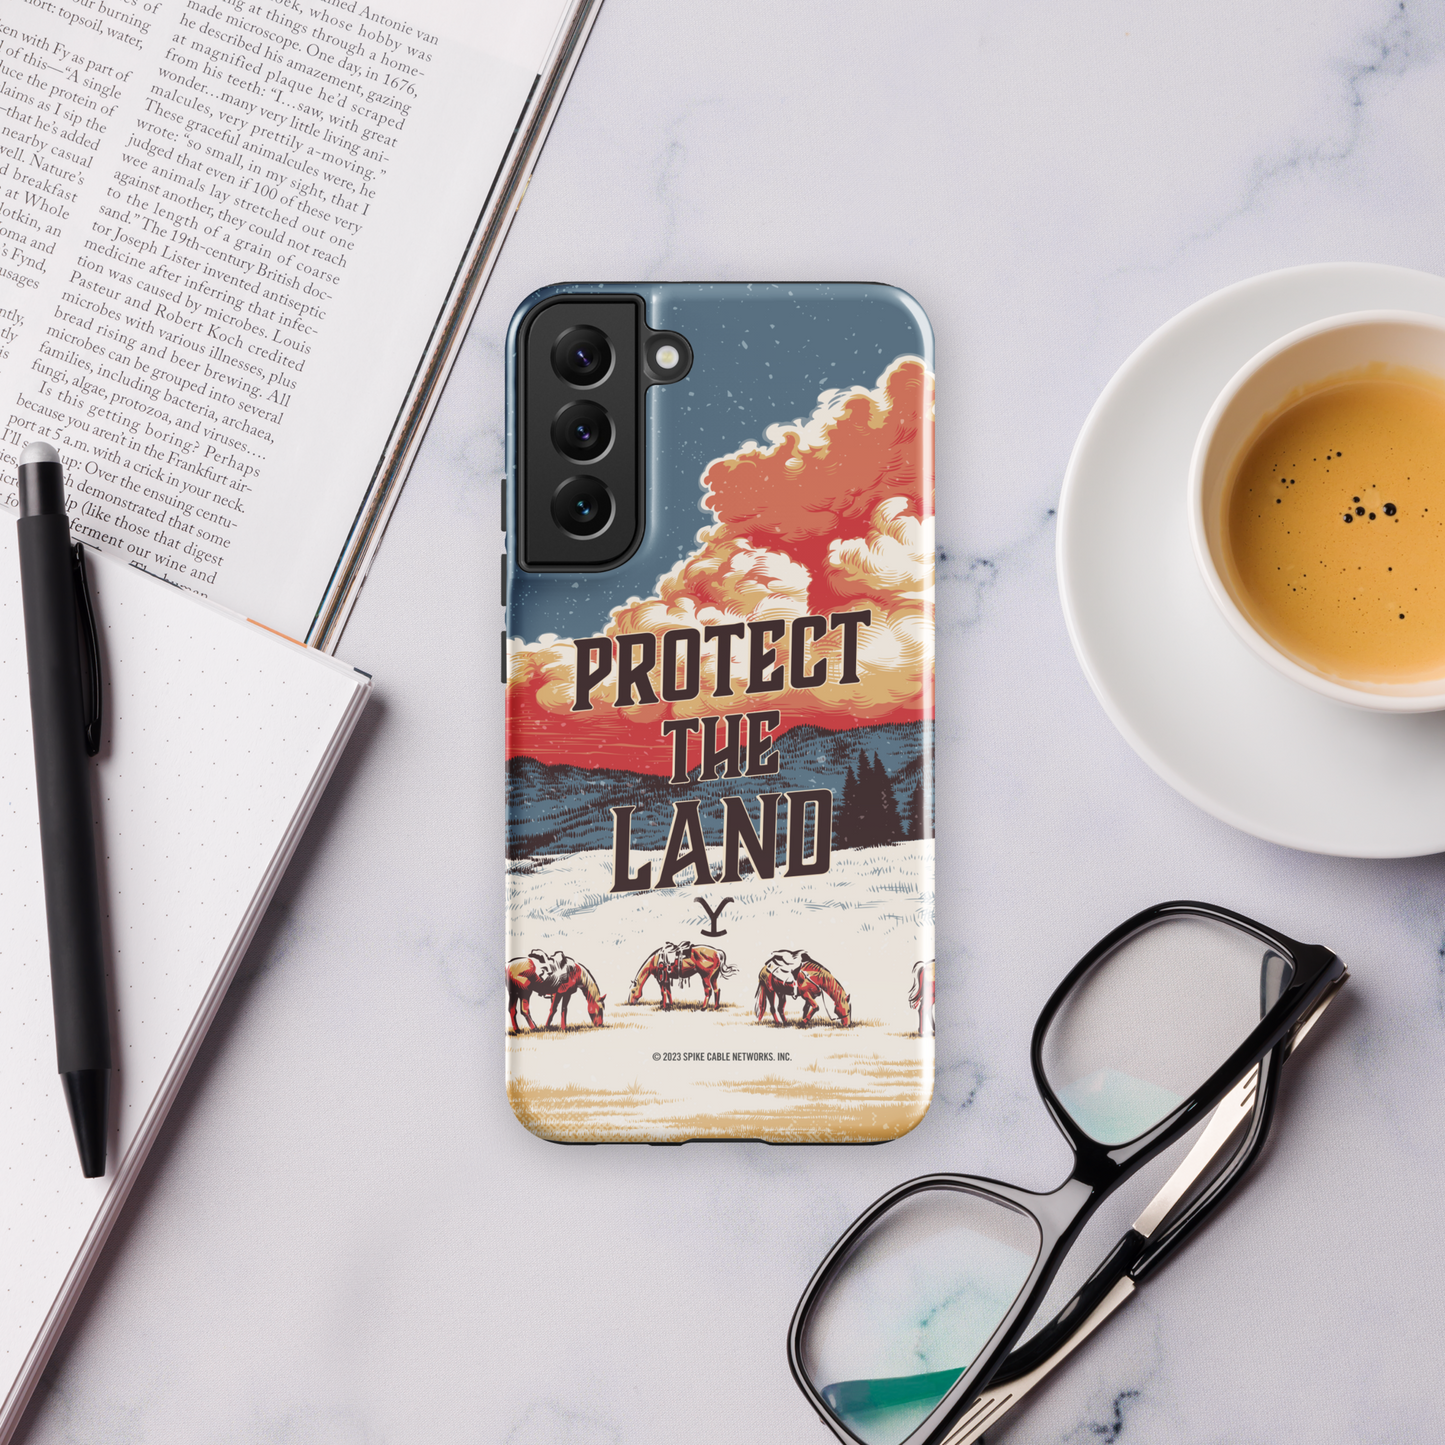 Yellowstone Protect the Land Tough Phone Case - Samsung